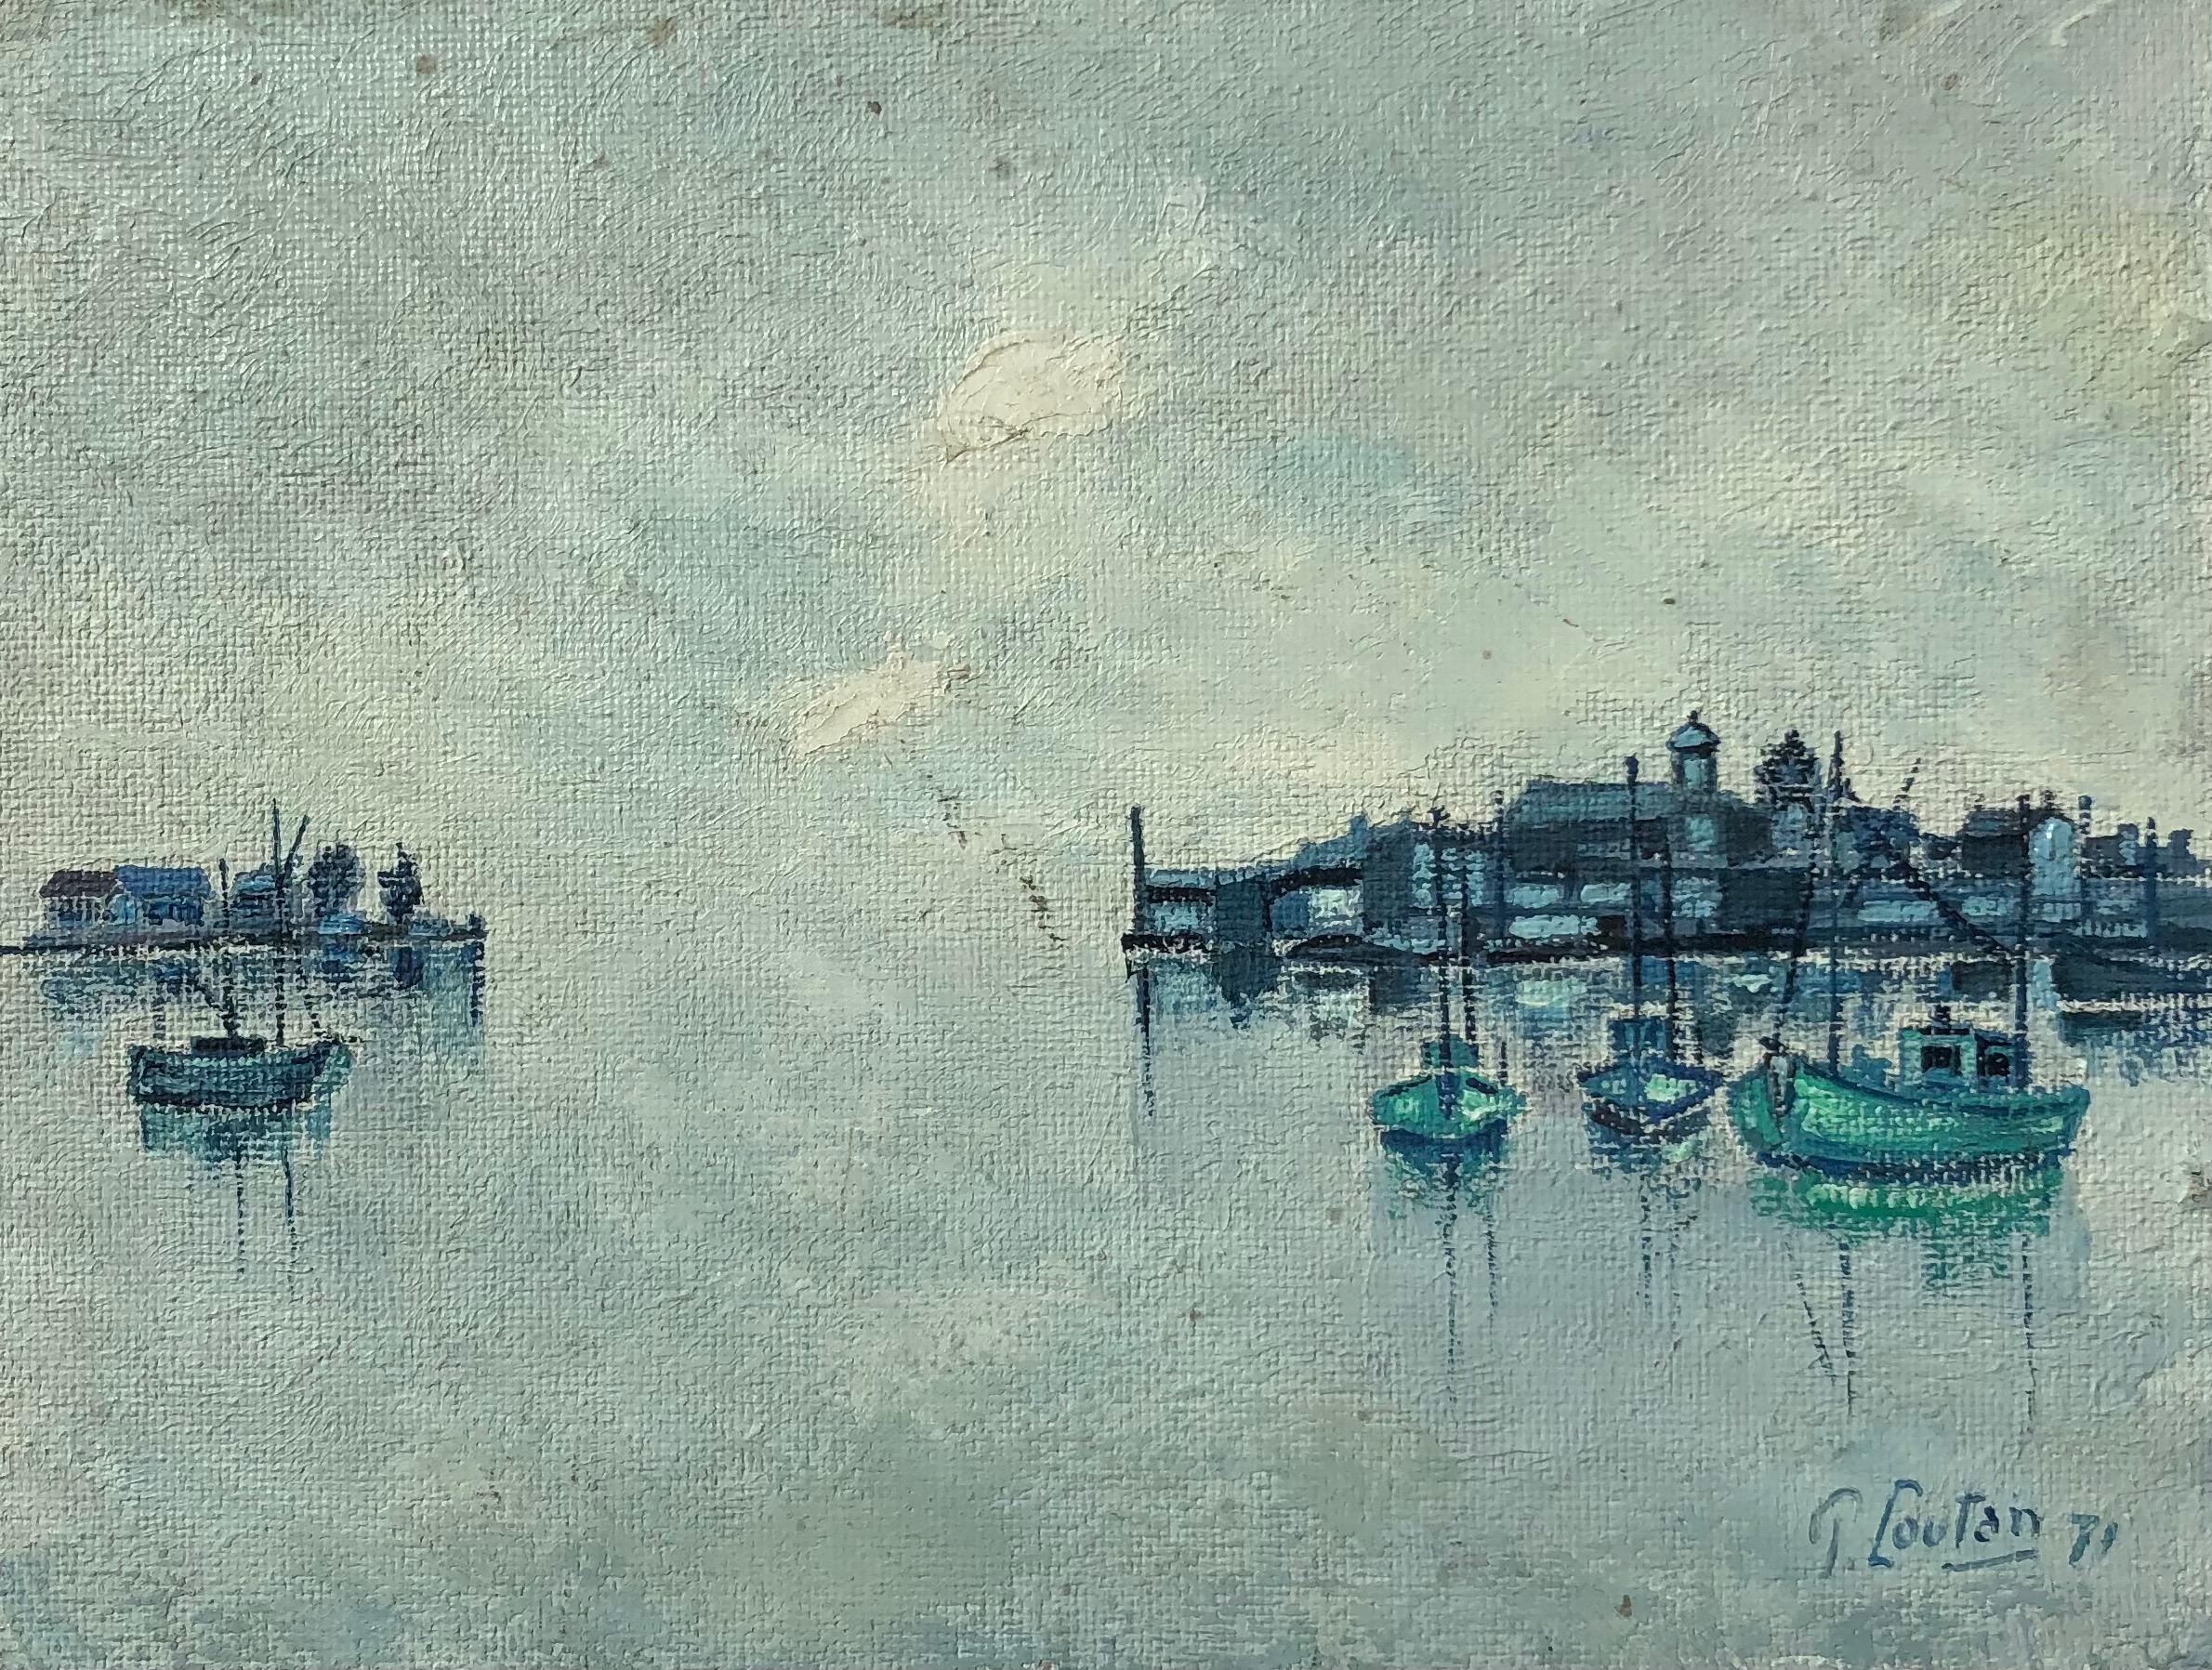 P. Loutan Landscape Painting - Fishing boats in the harbor